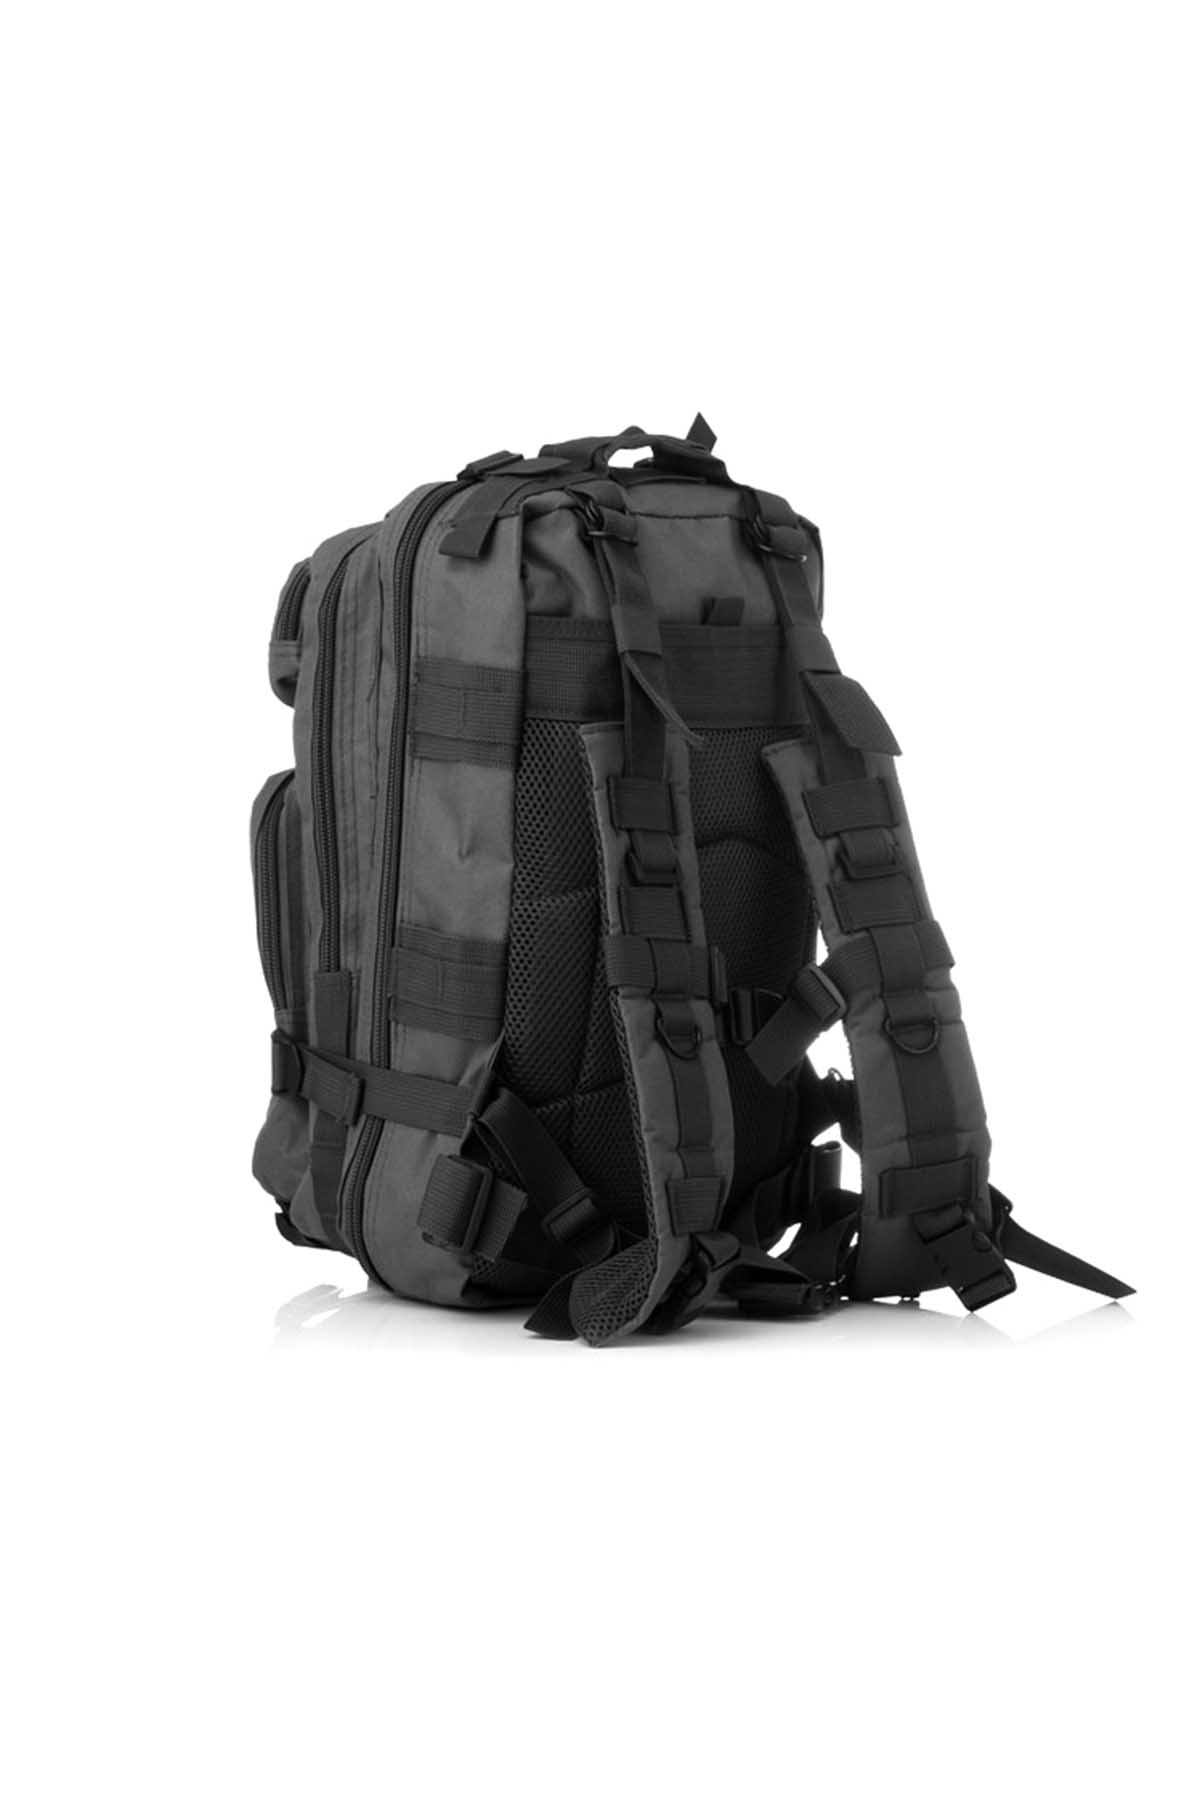 Something Strong Charcoal Military-Style Mid-Size Backpack